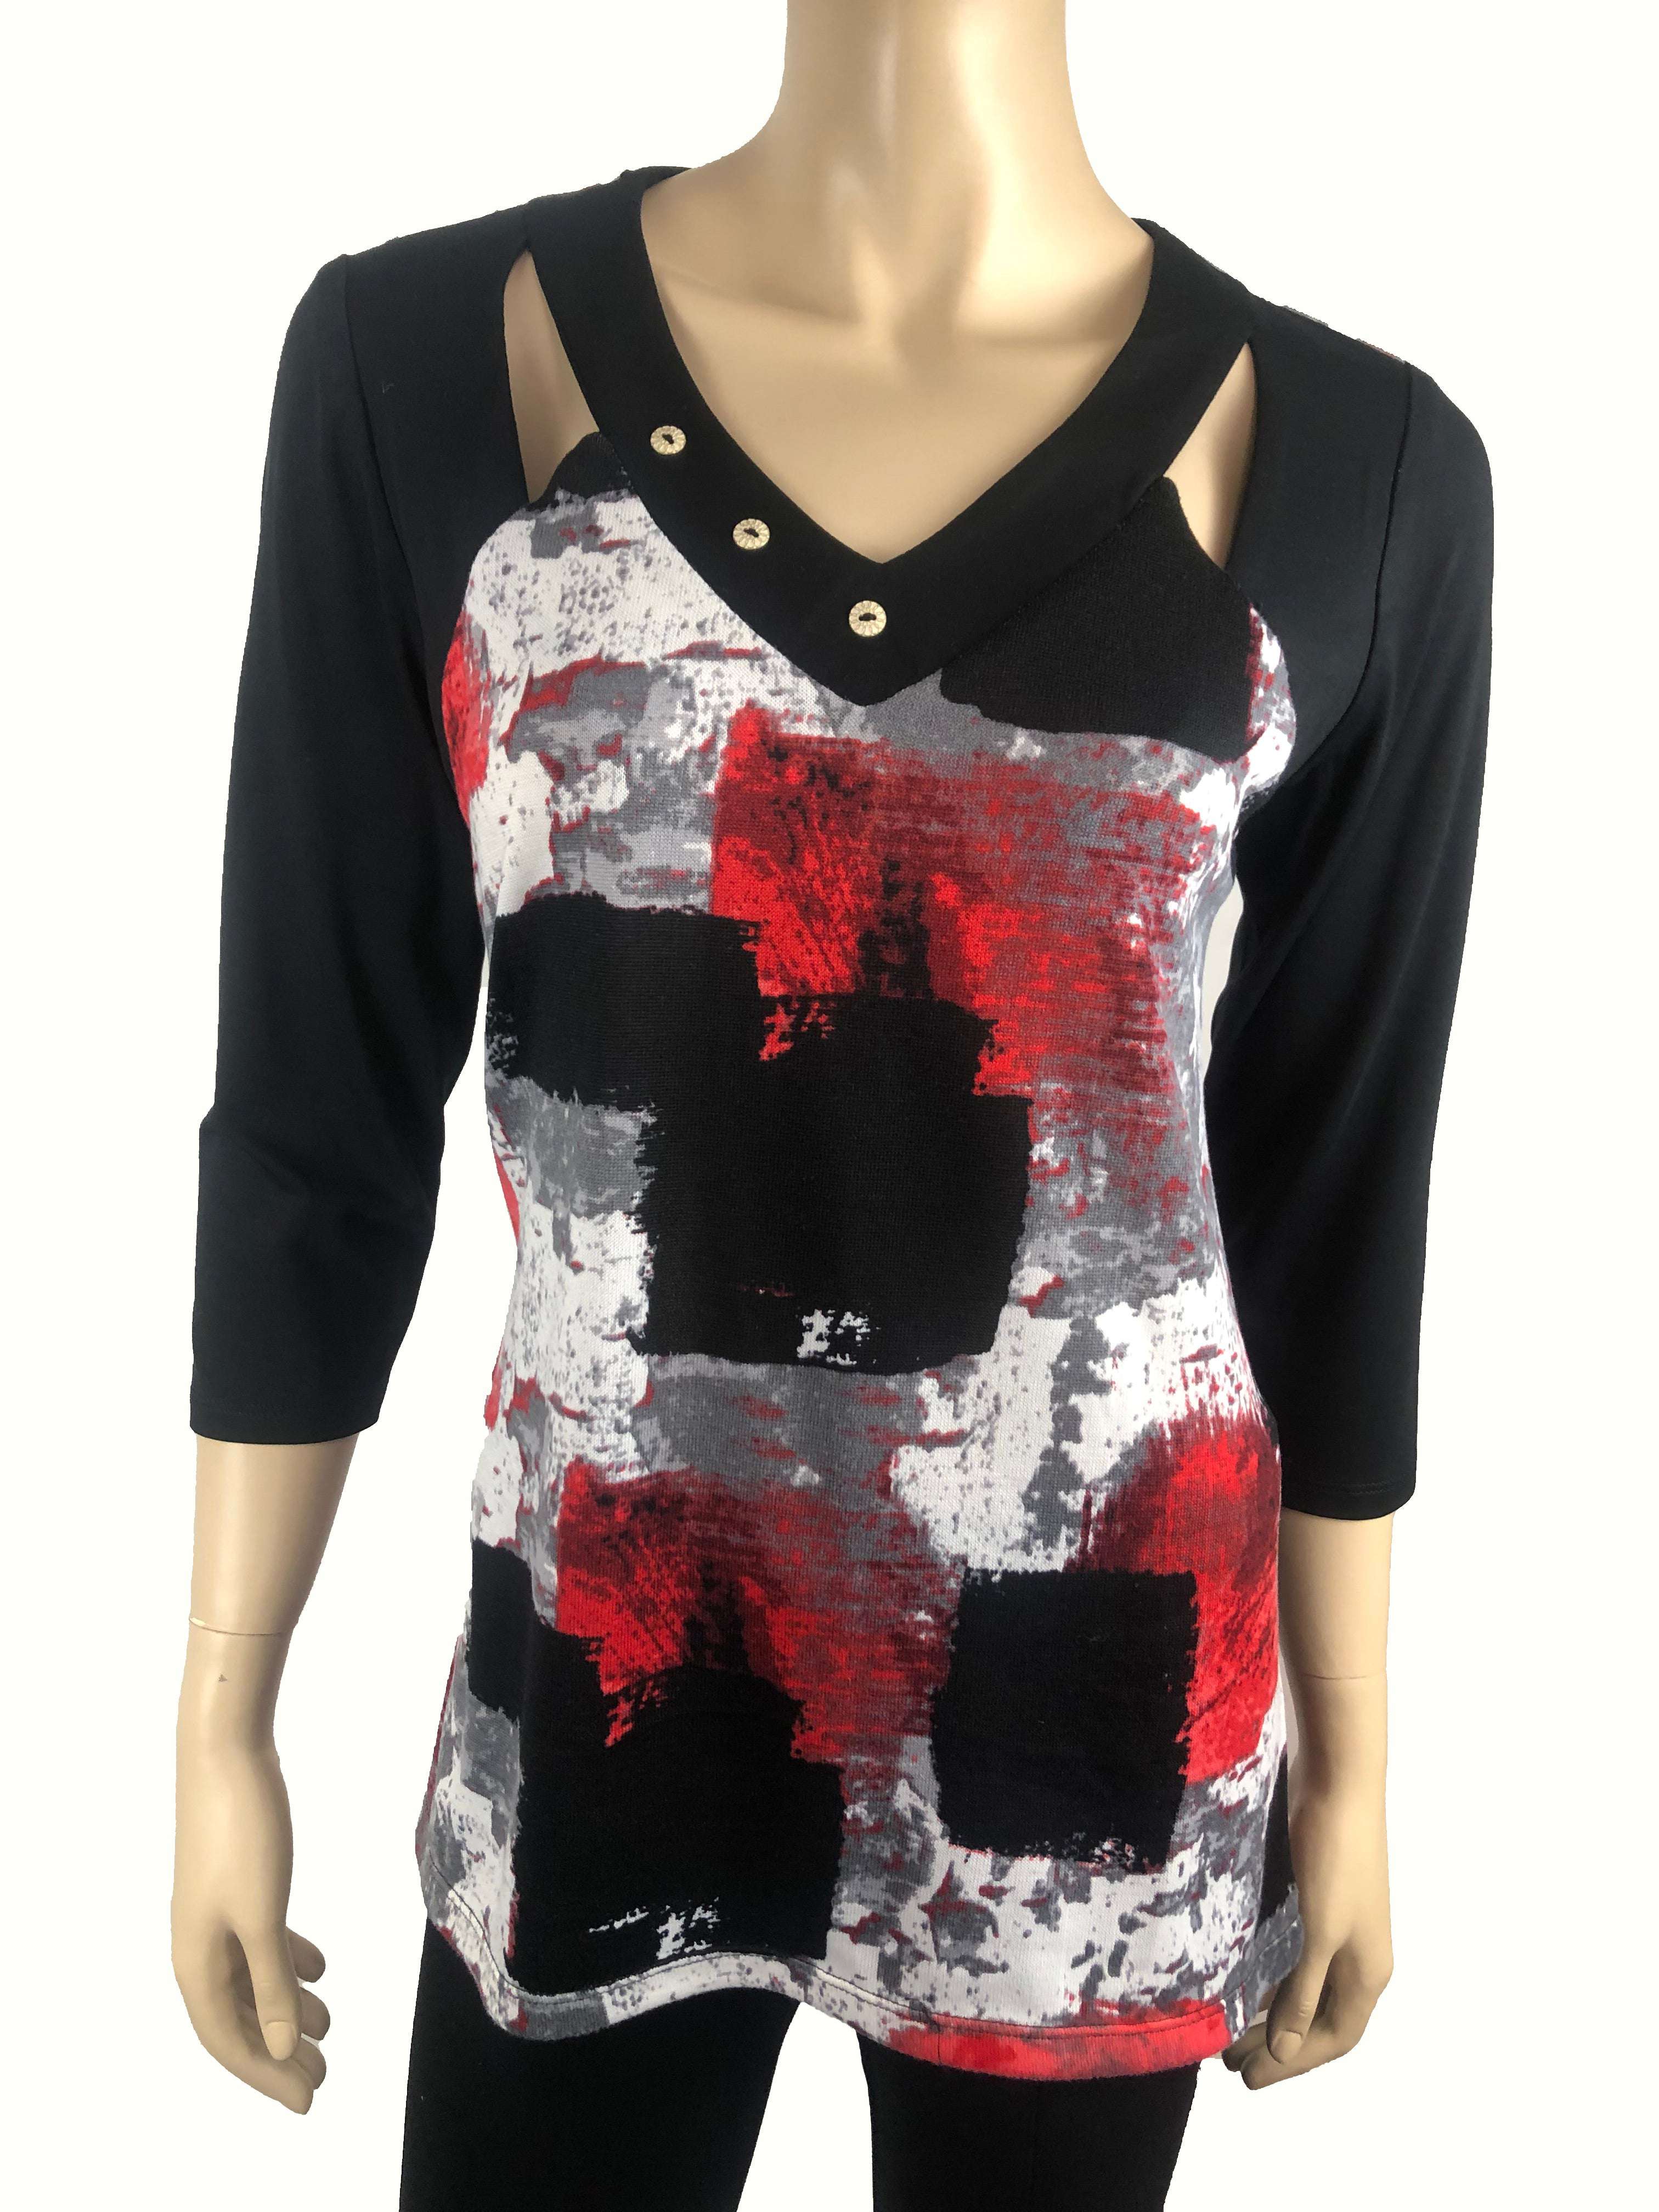 Women's Tops Red And Black Print With Cut Out Neckline - Made In Canada Quality Fabric Amazing Fit - Yvonne Marie - Yvonne Marie